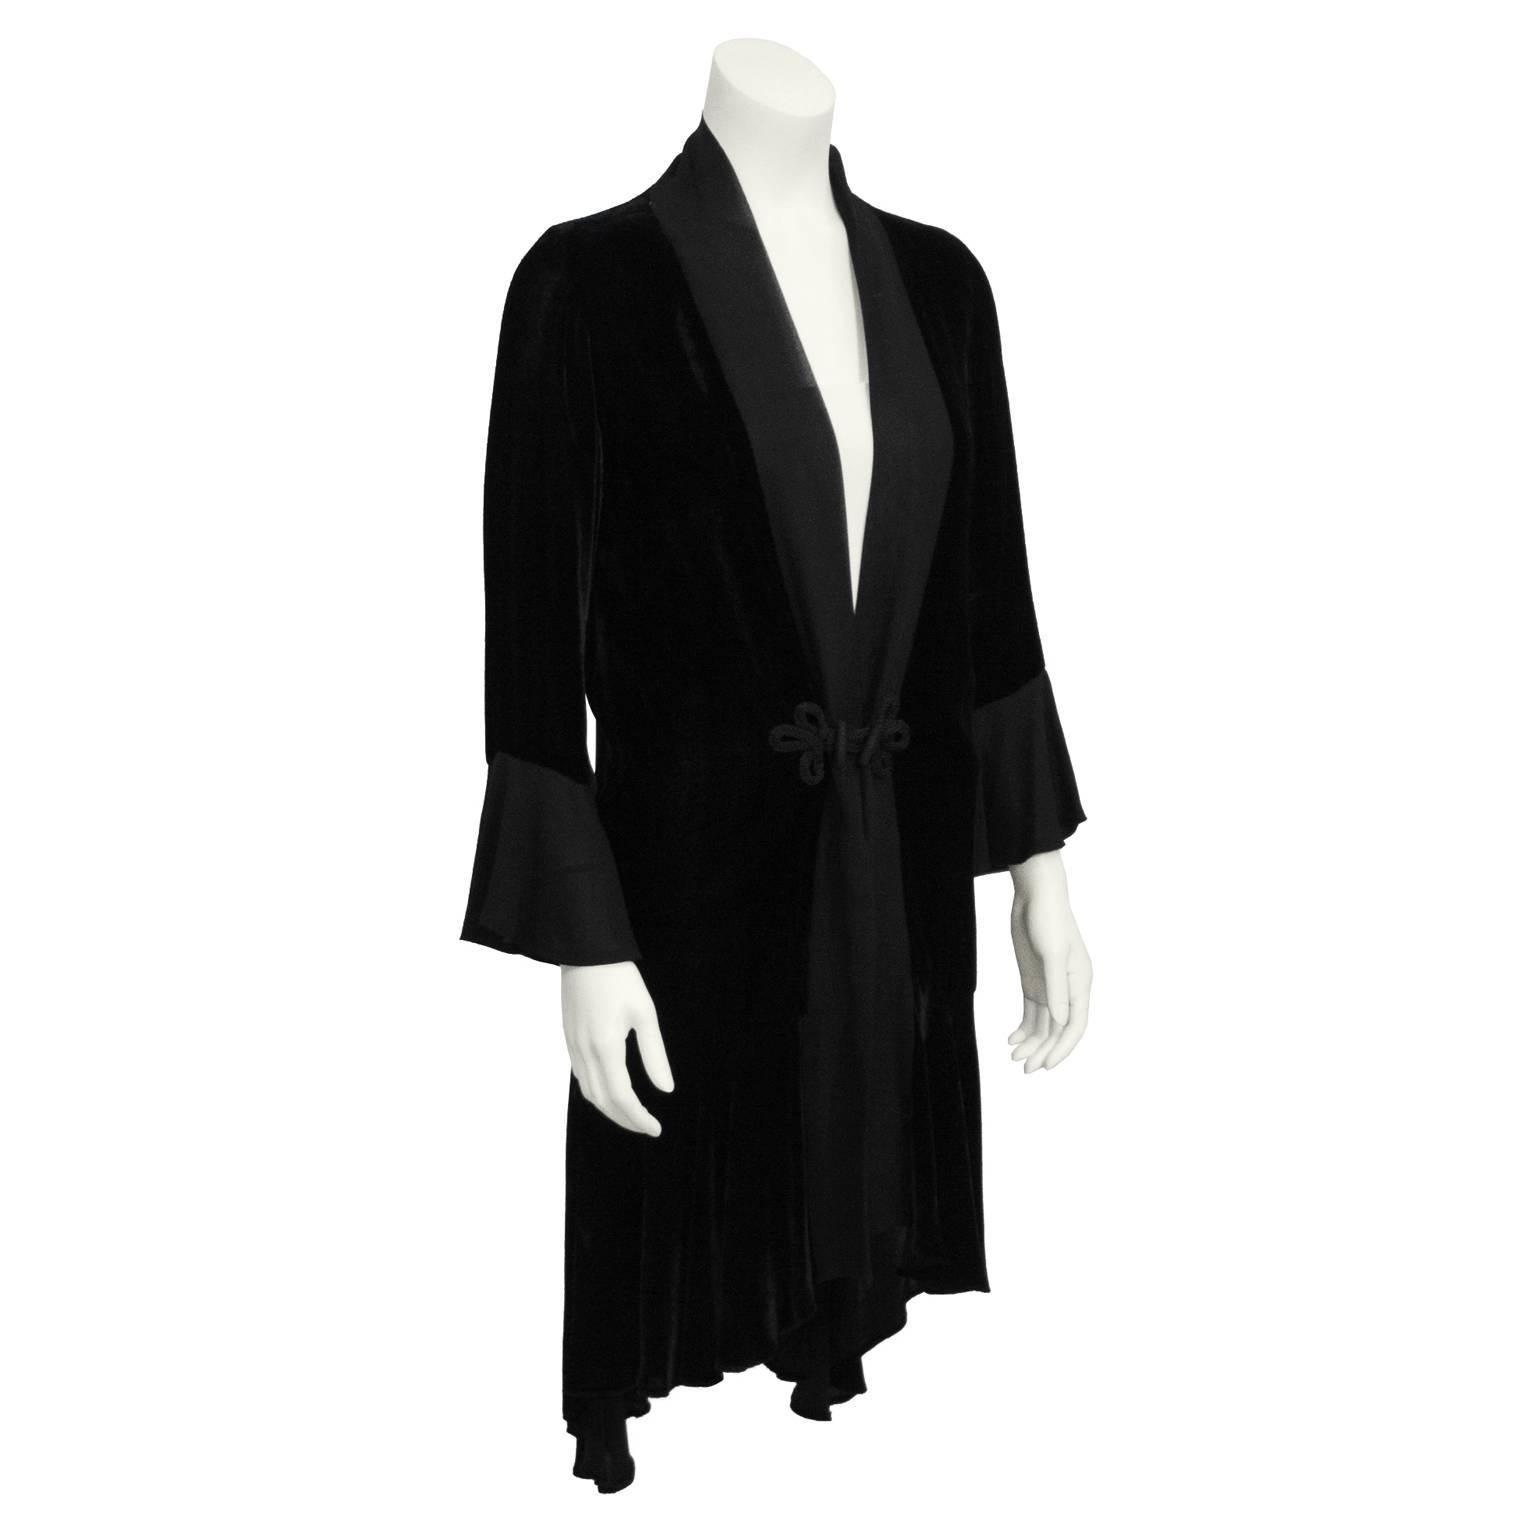 Elegant black velvet robe jacket from the 1930's. Jacket, typically worn over a beaded chemise is silk velvet with a chiffon trim and green silk lining. Chiffon sleeve flares at wrist. Hemline is trimmed with chiffon flowing from a high front to a